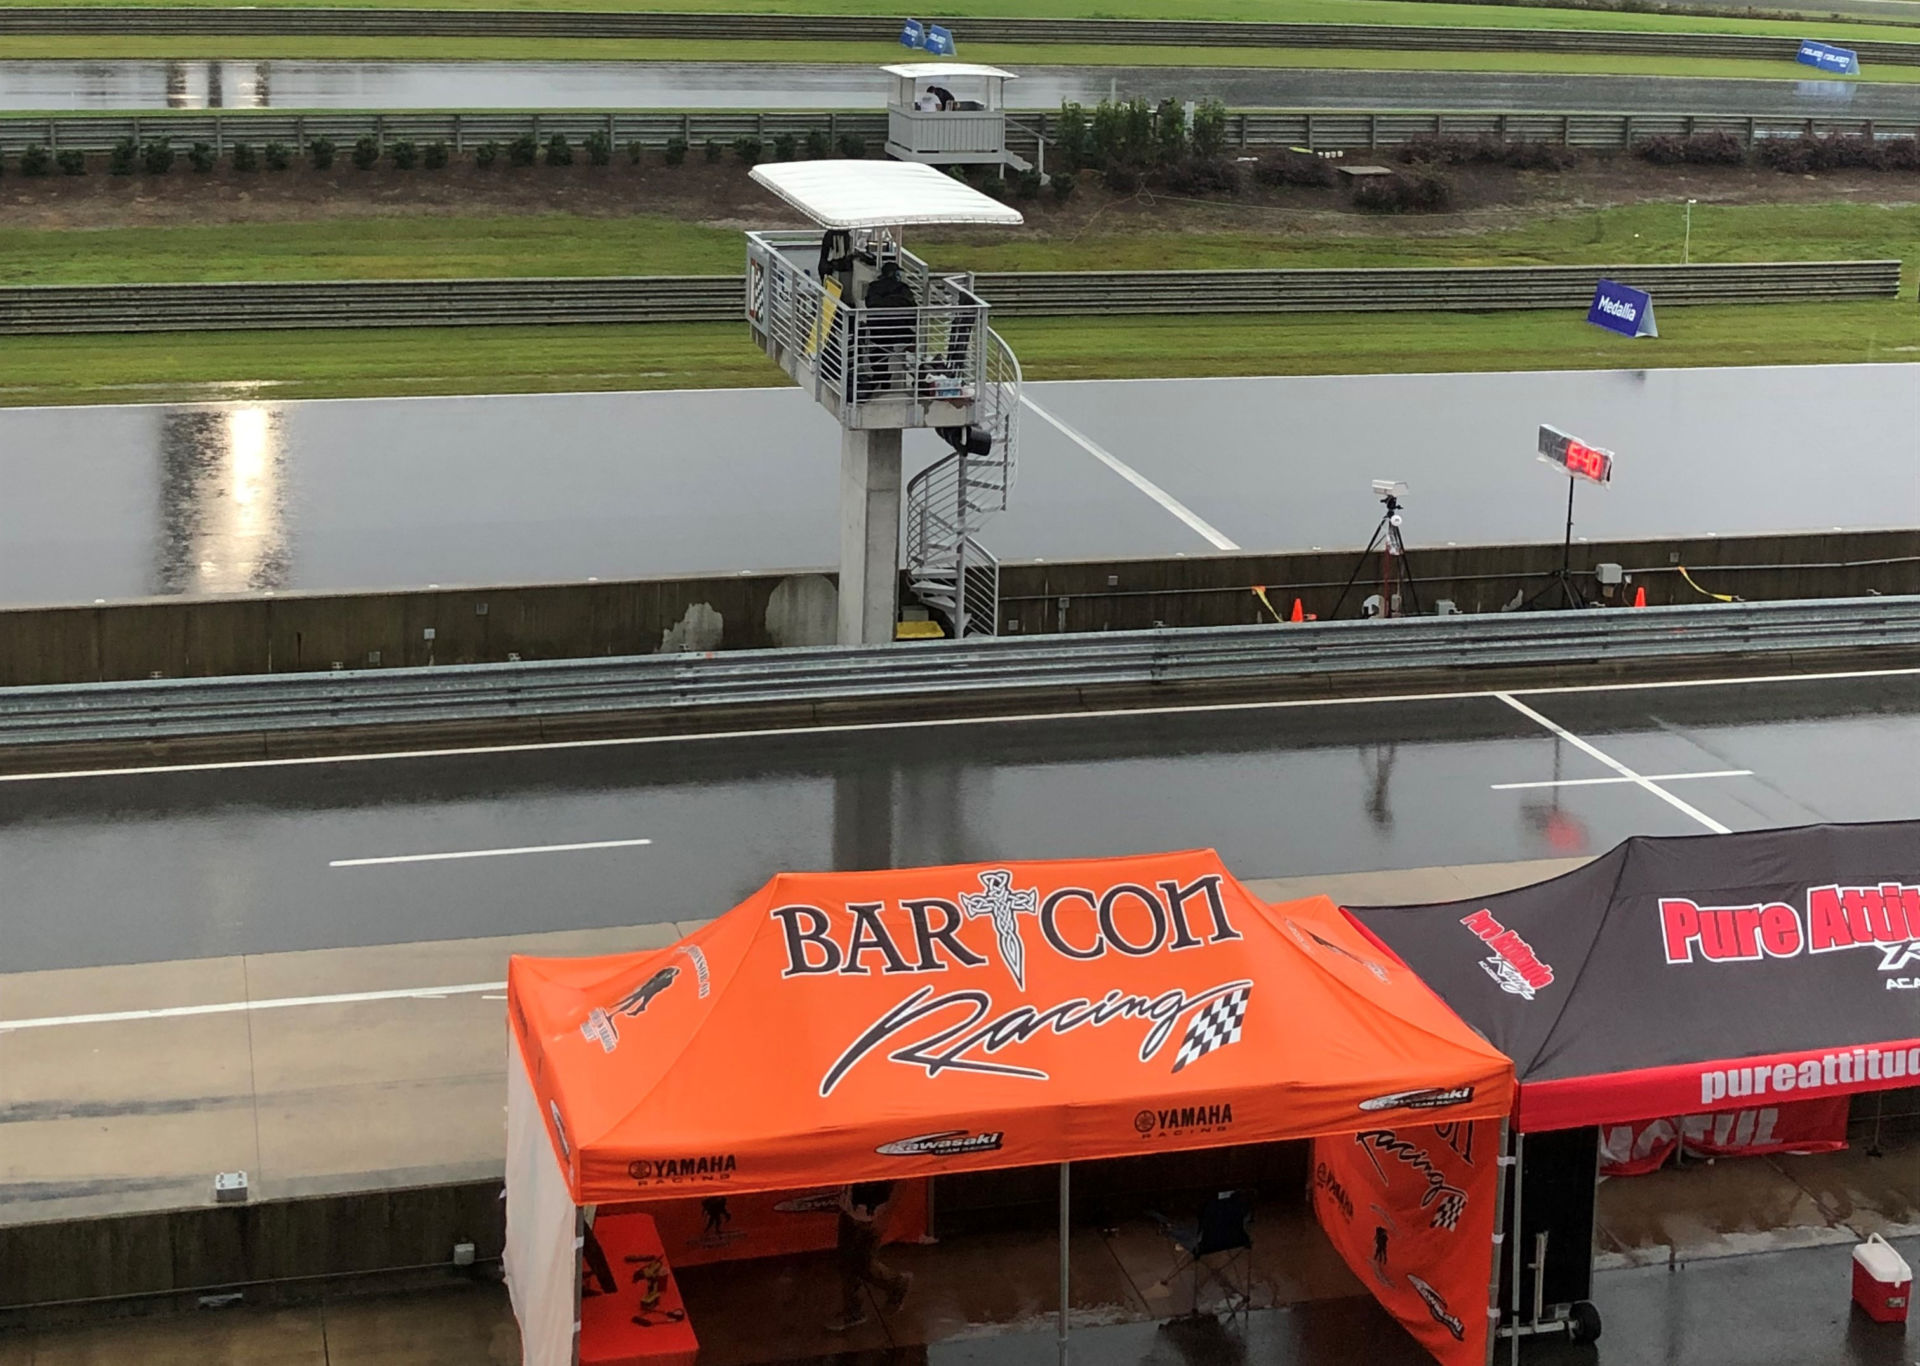 The view from the control tower at rainy Barber Motorsports Park at approximately 9:45 a.m. Central Time Saturday. Photo by David Swarts.